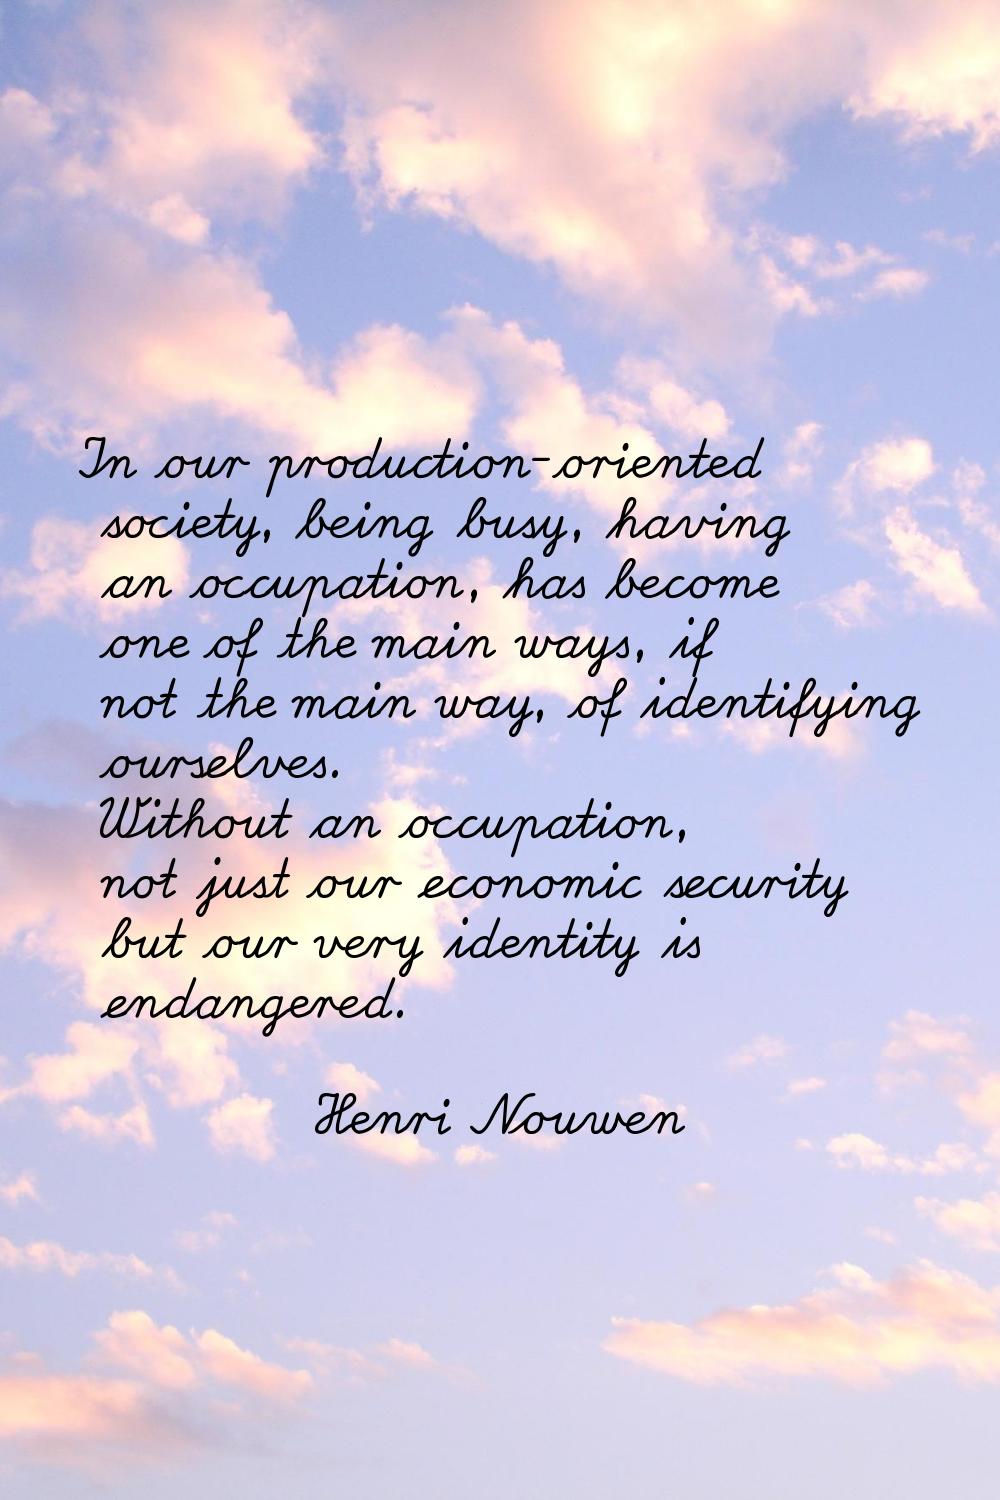 In our production-oriented society, being busy, having an occupation, has become one of the main wa